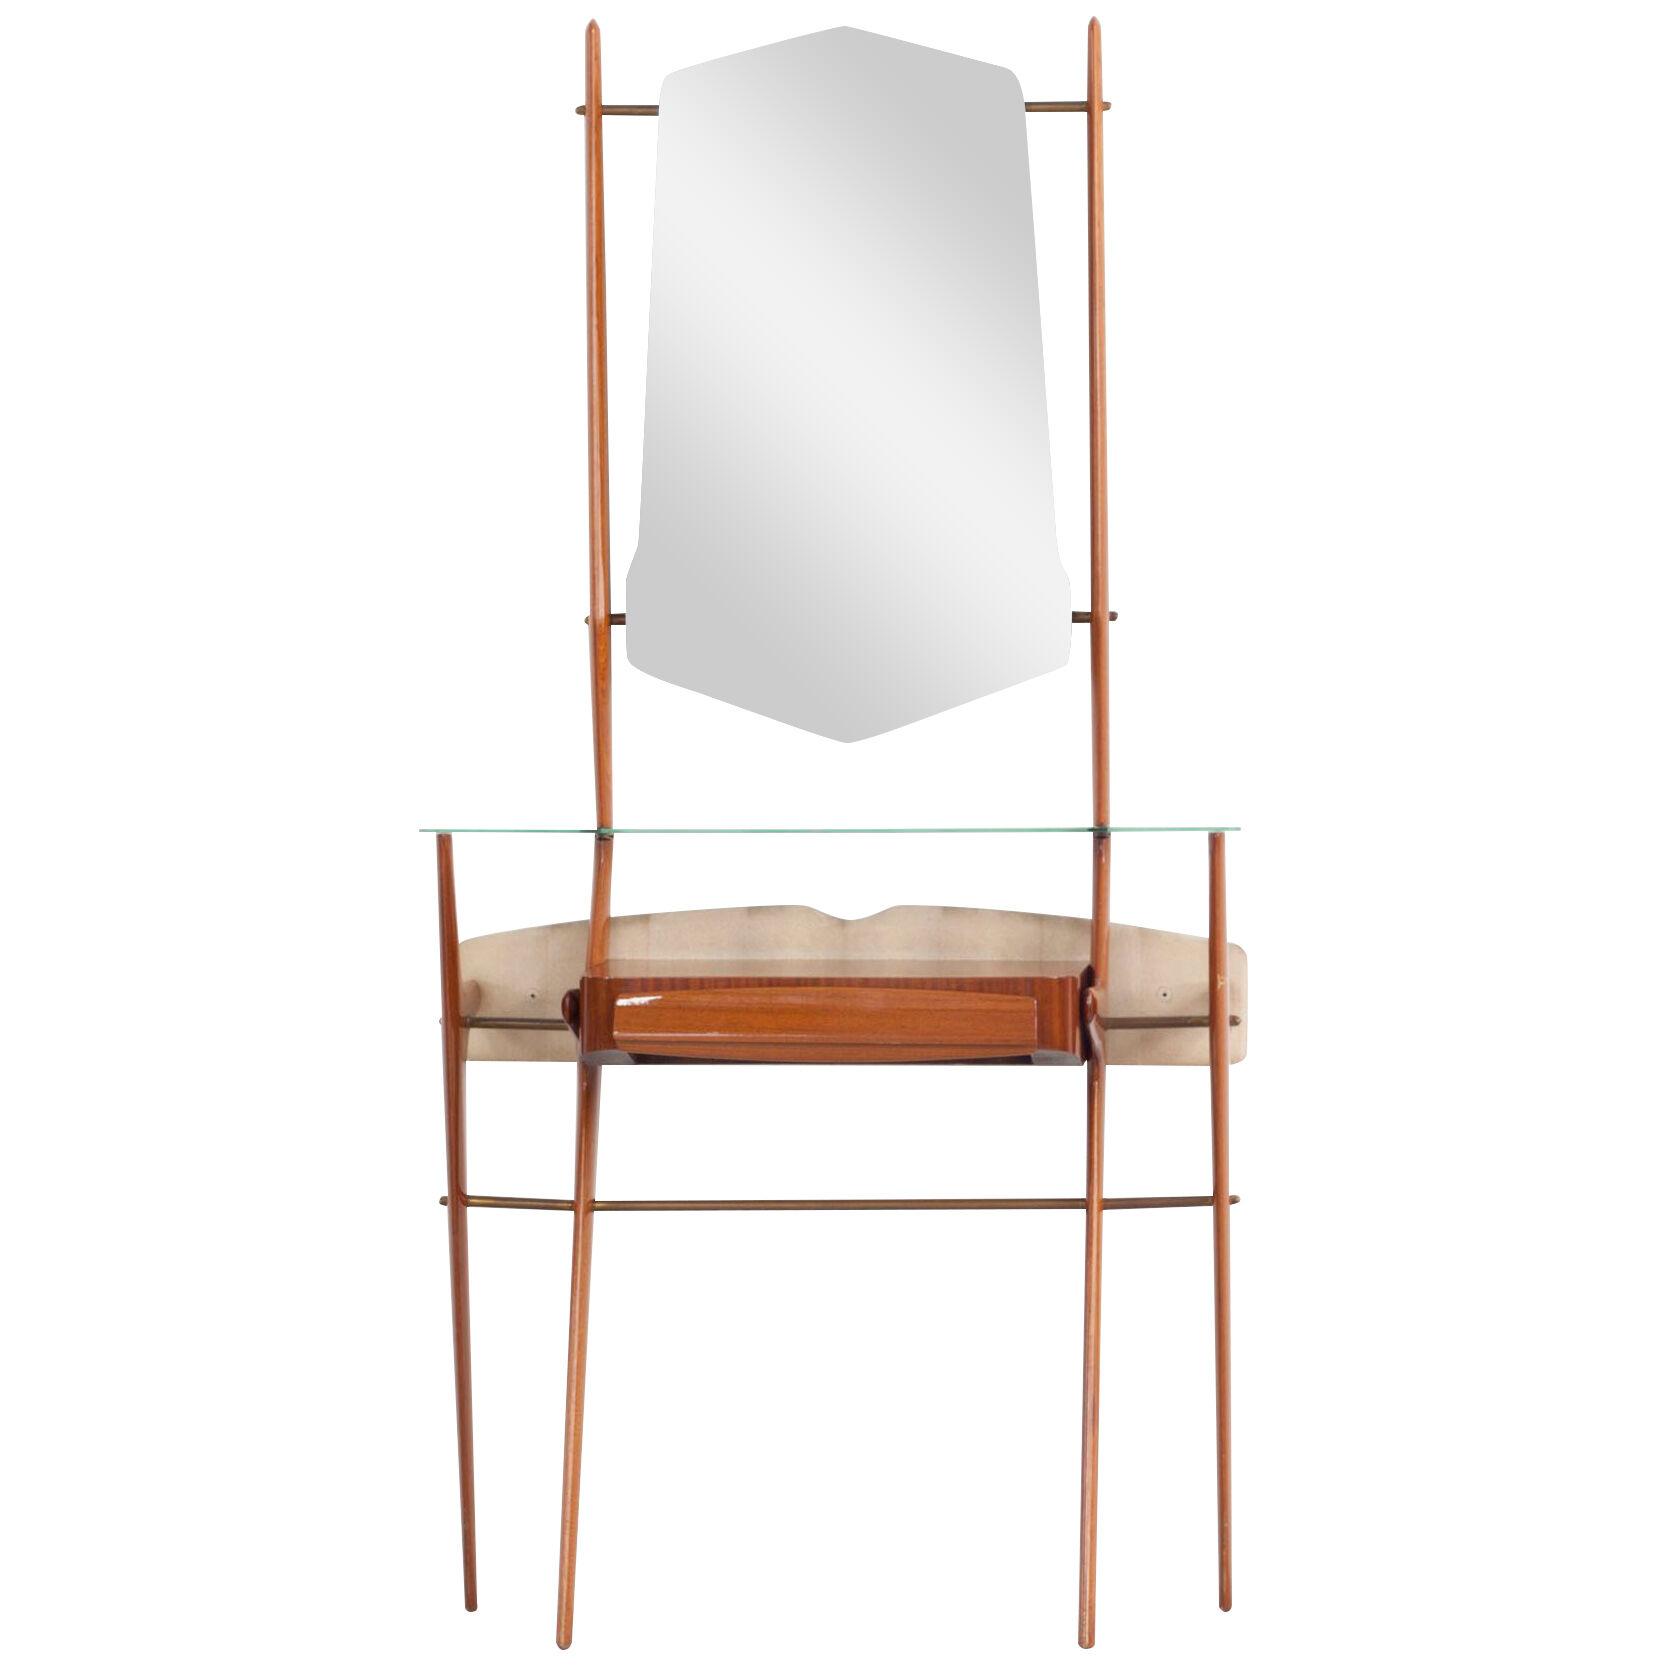 Wooden Midcentury Console with Mirror, Italy, 1950